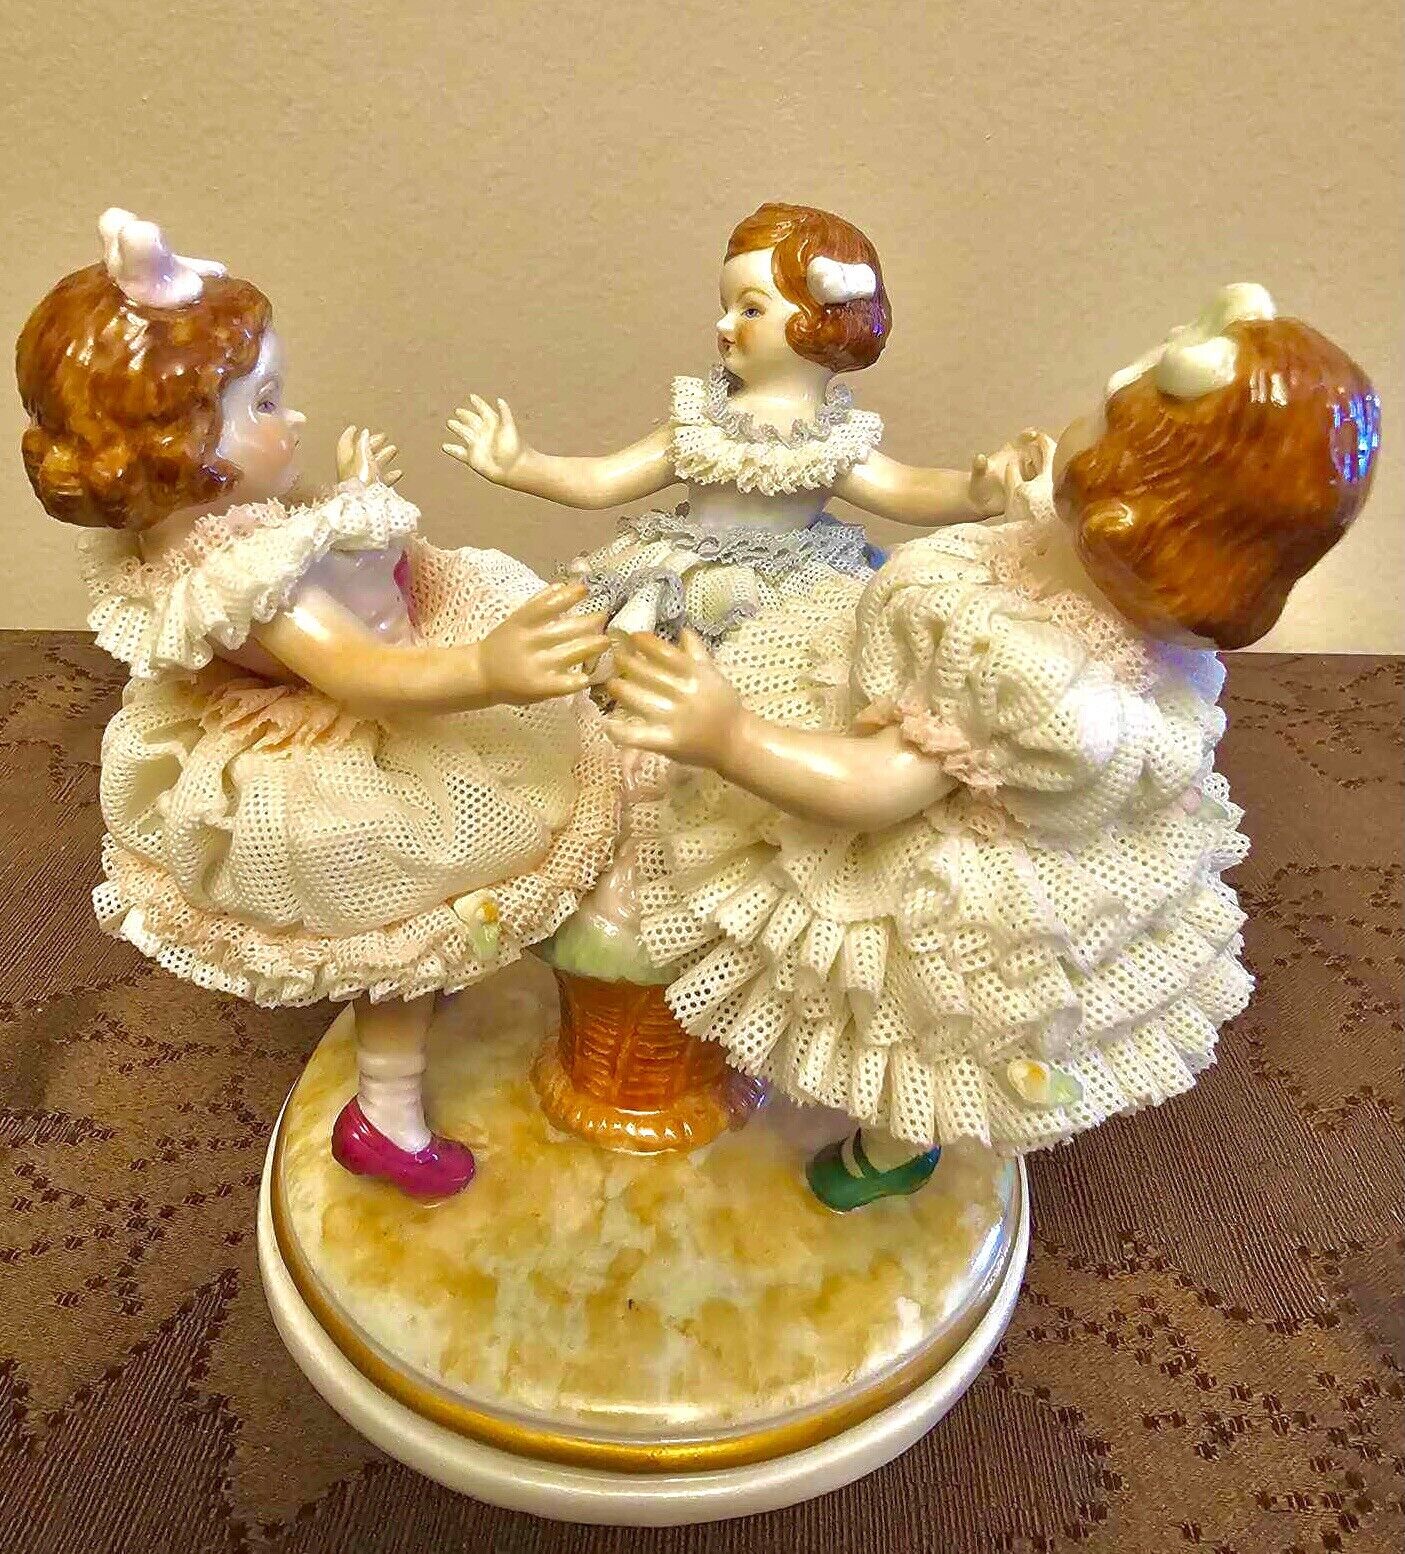 Dresden Porcelain Lace & Flowers Three Girls Ring Around the Rosy Figurine